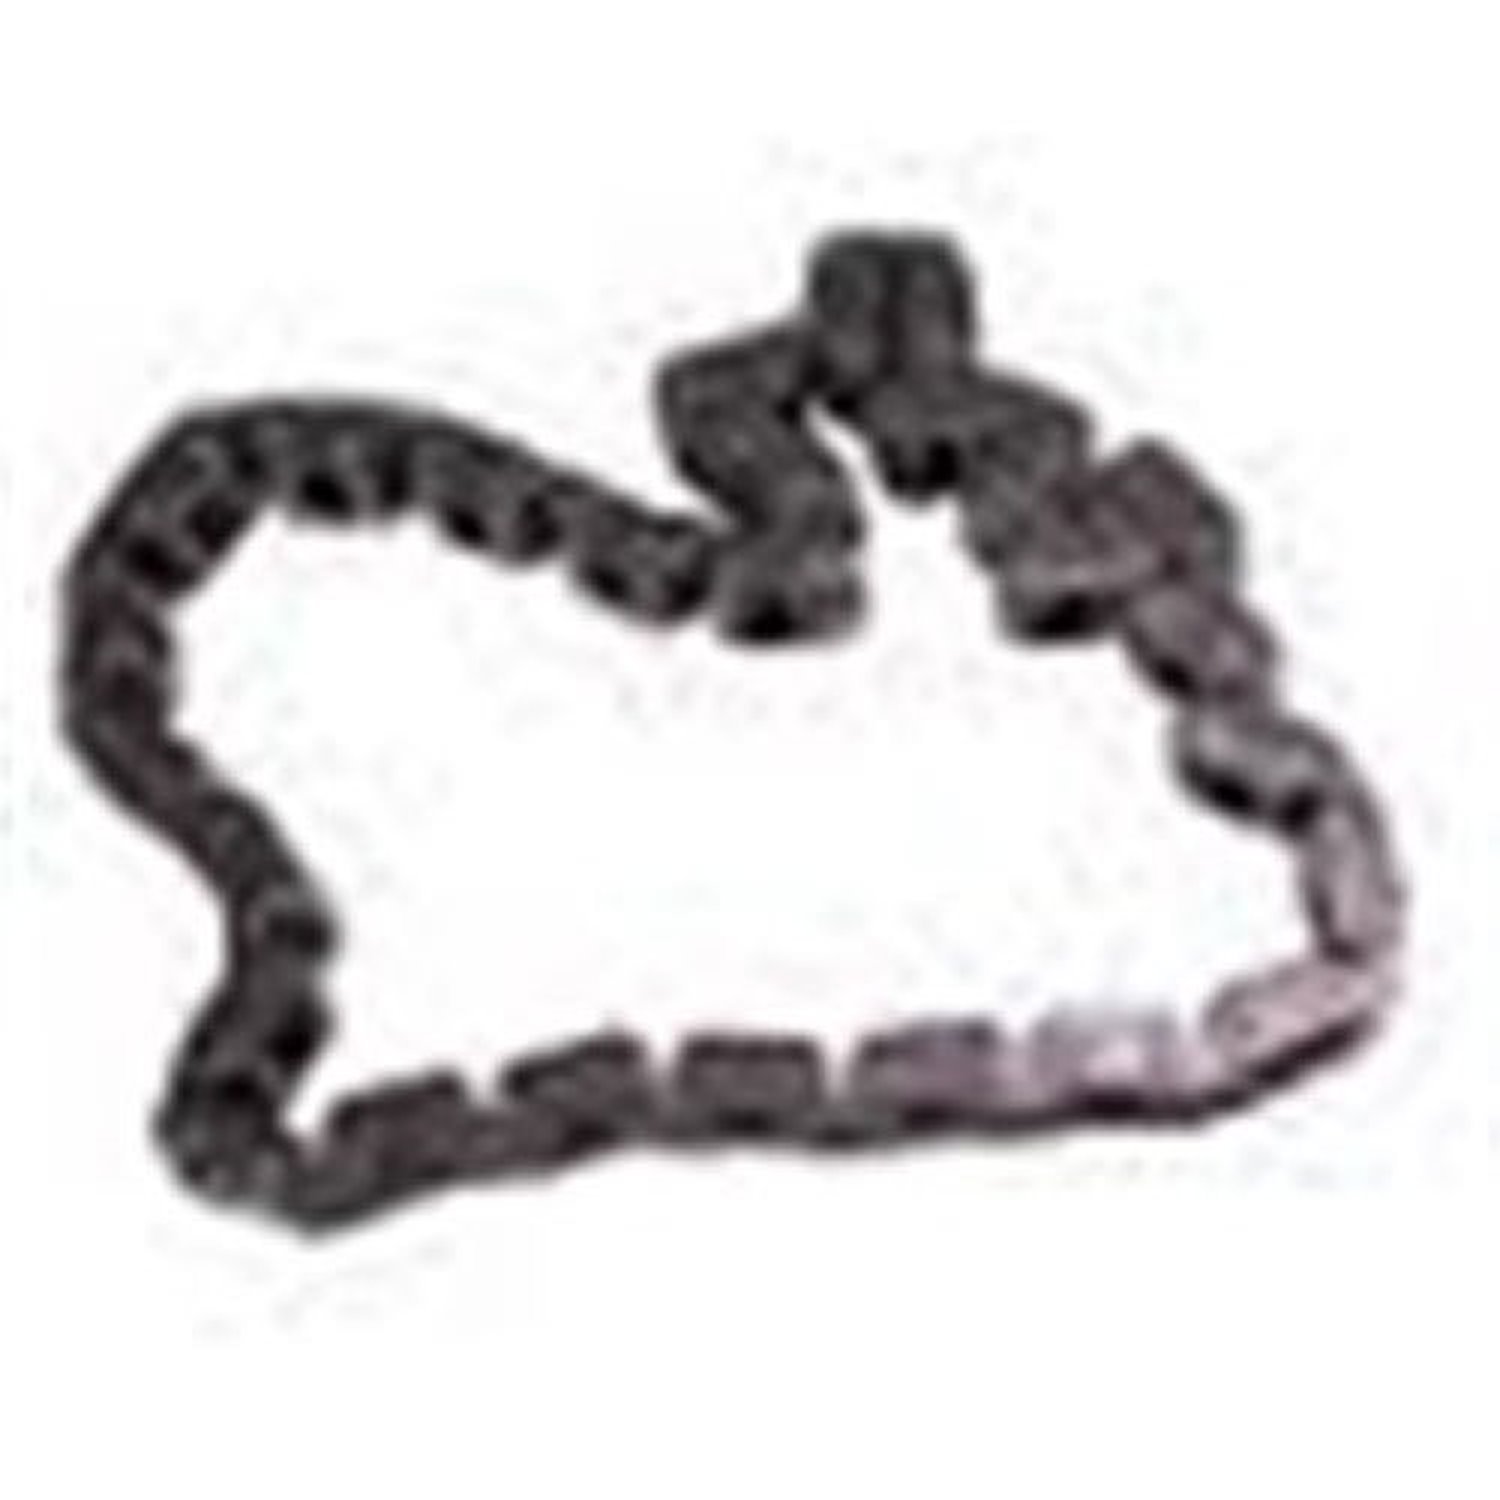 Replacement serpentine belt from Omix-ADA, Fits 98-01 Jeep Cherokees.